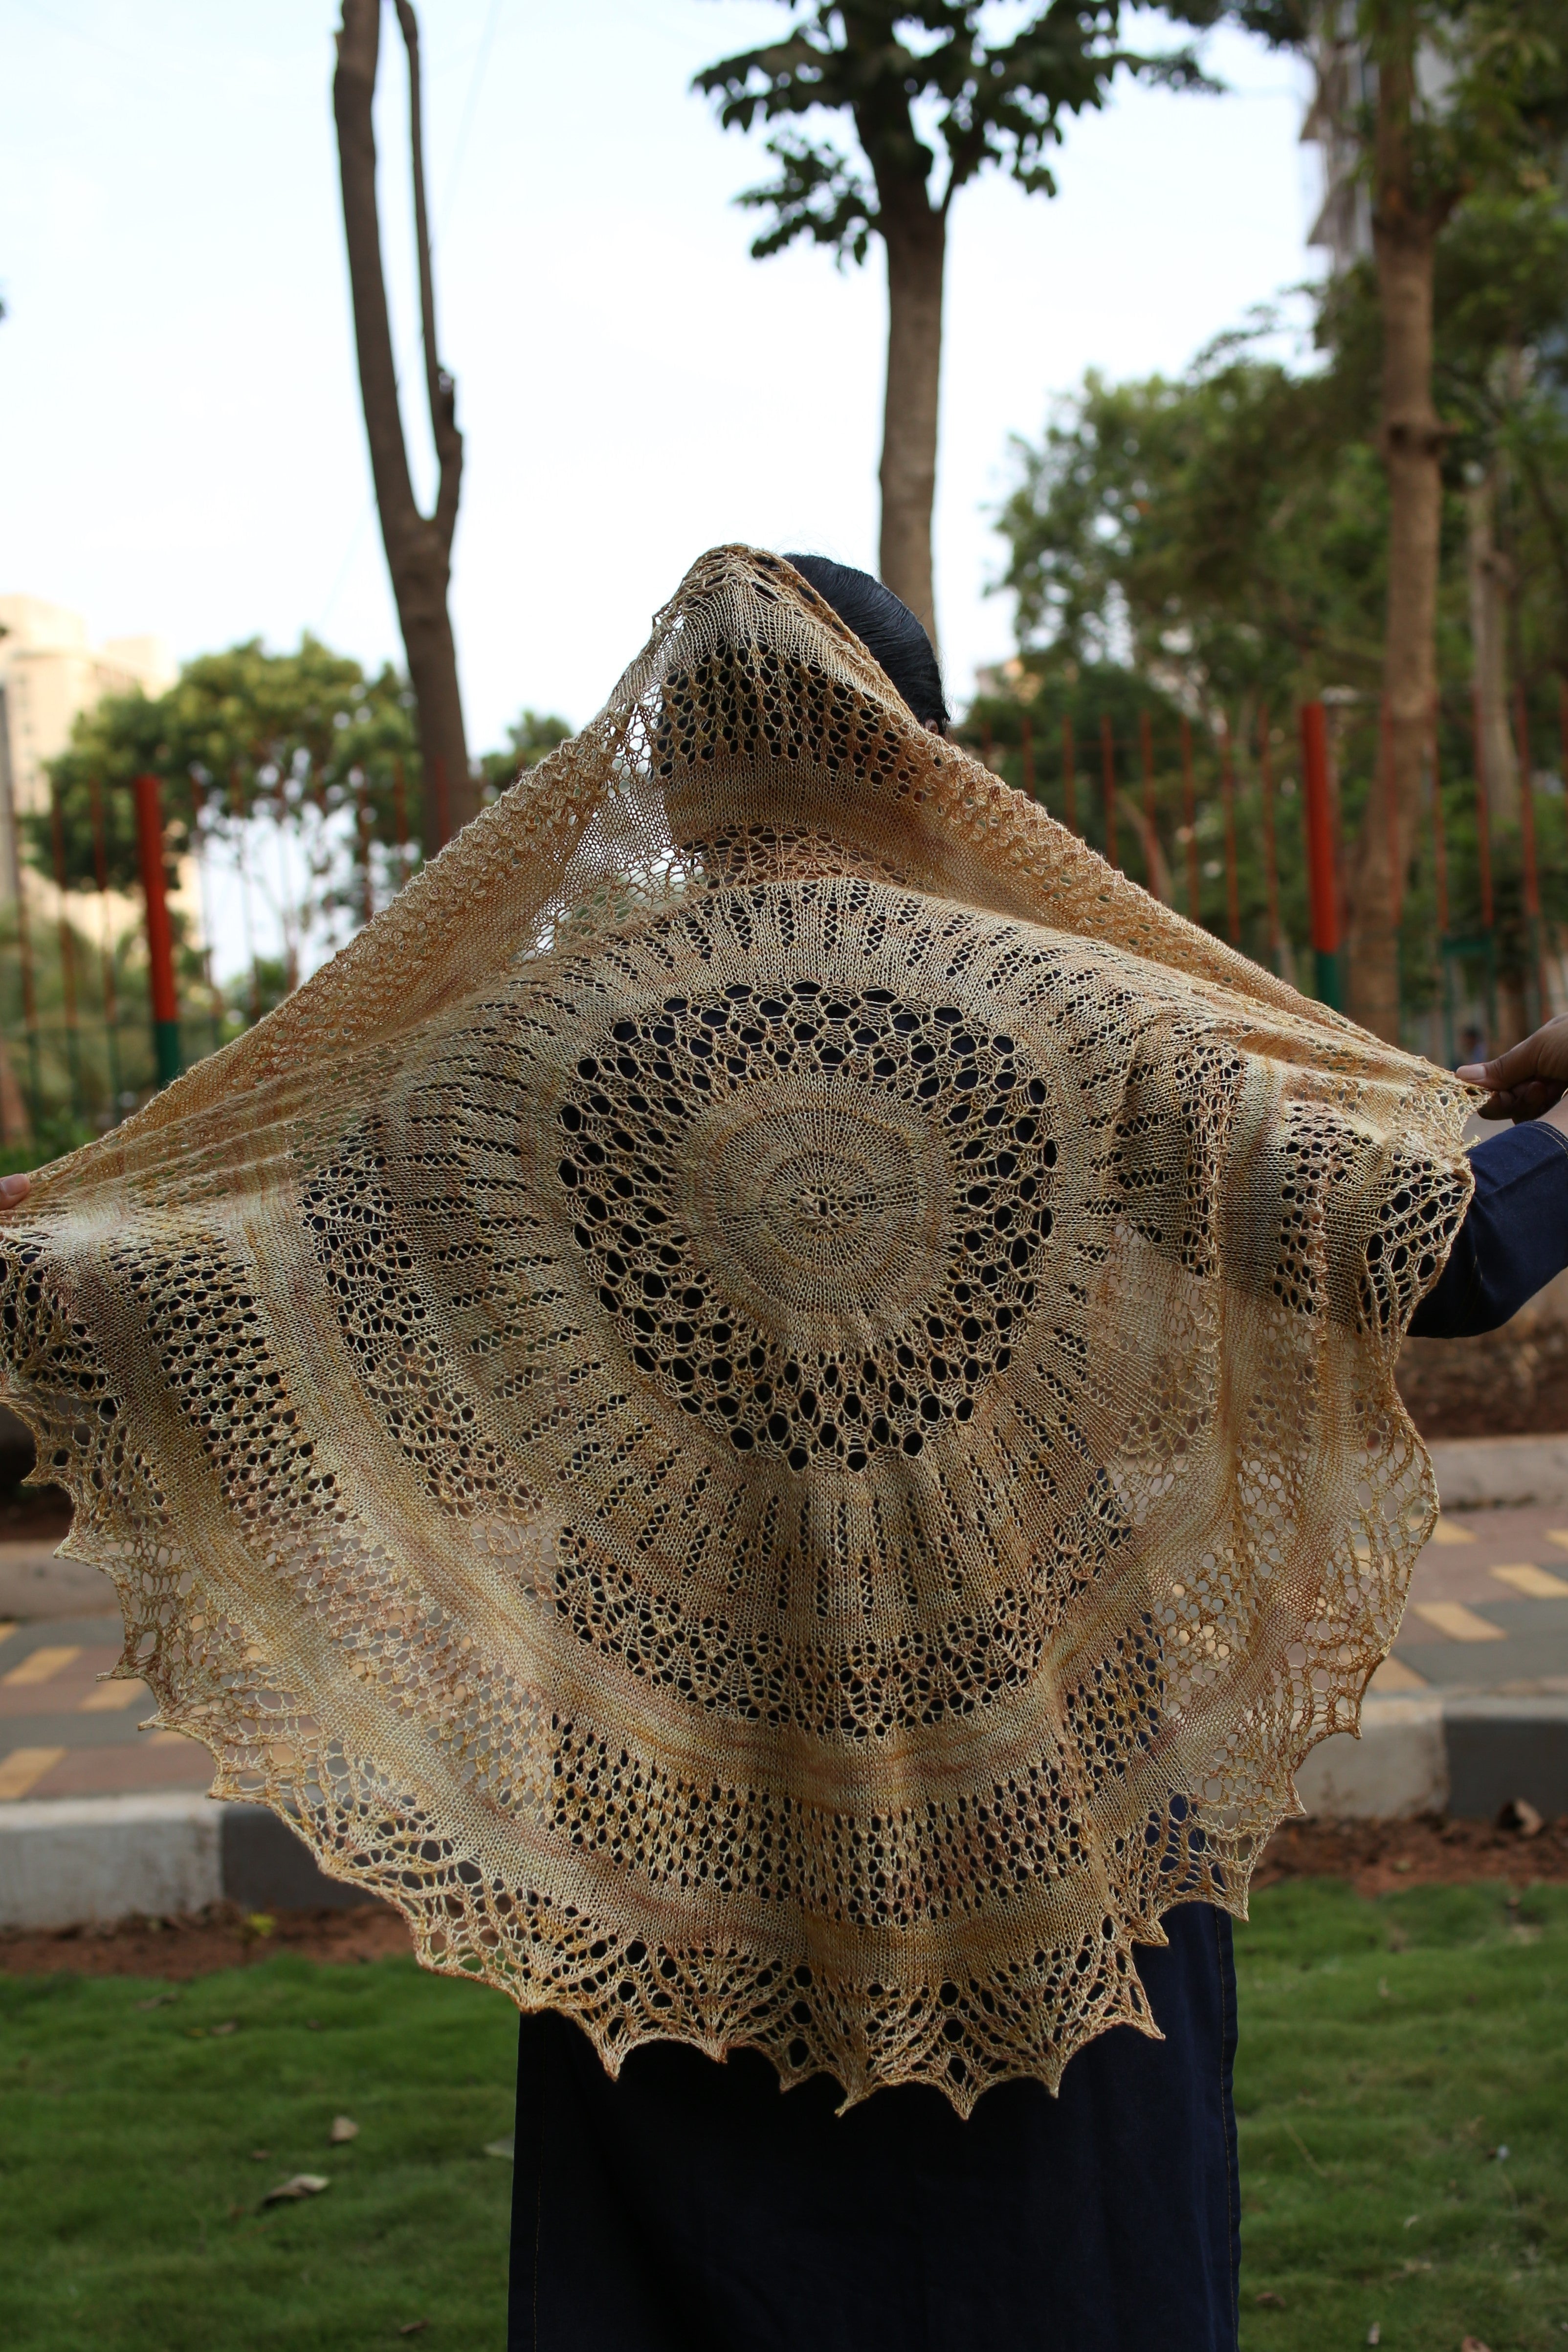 A person facing away from the camera holding a large circular shawl. The golden yellow shawl has an intricate circular lace pattern expanding out from the centre